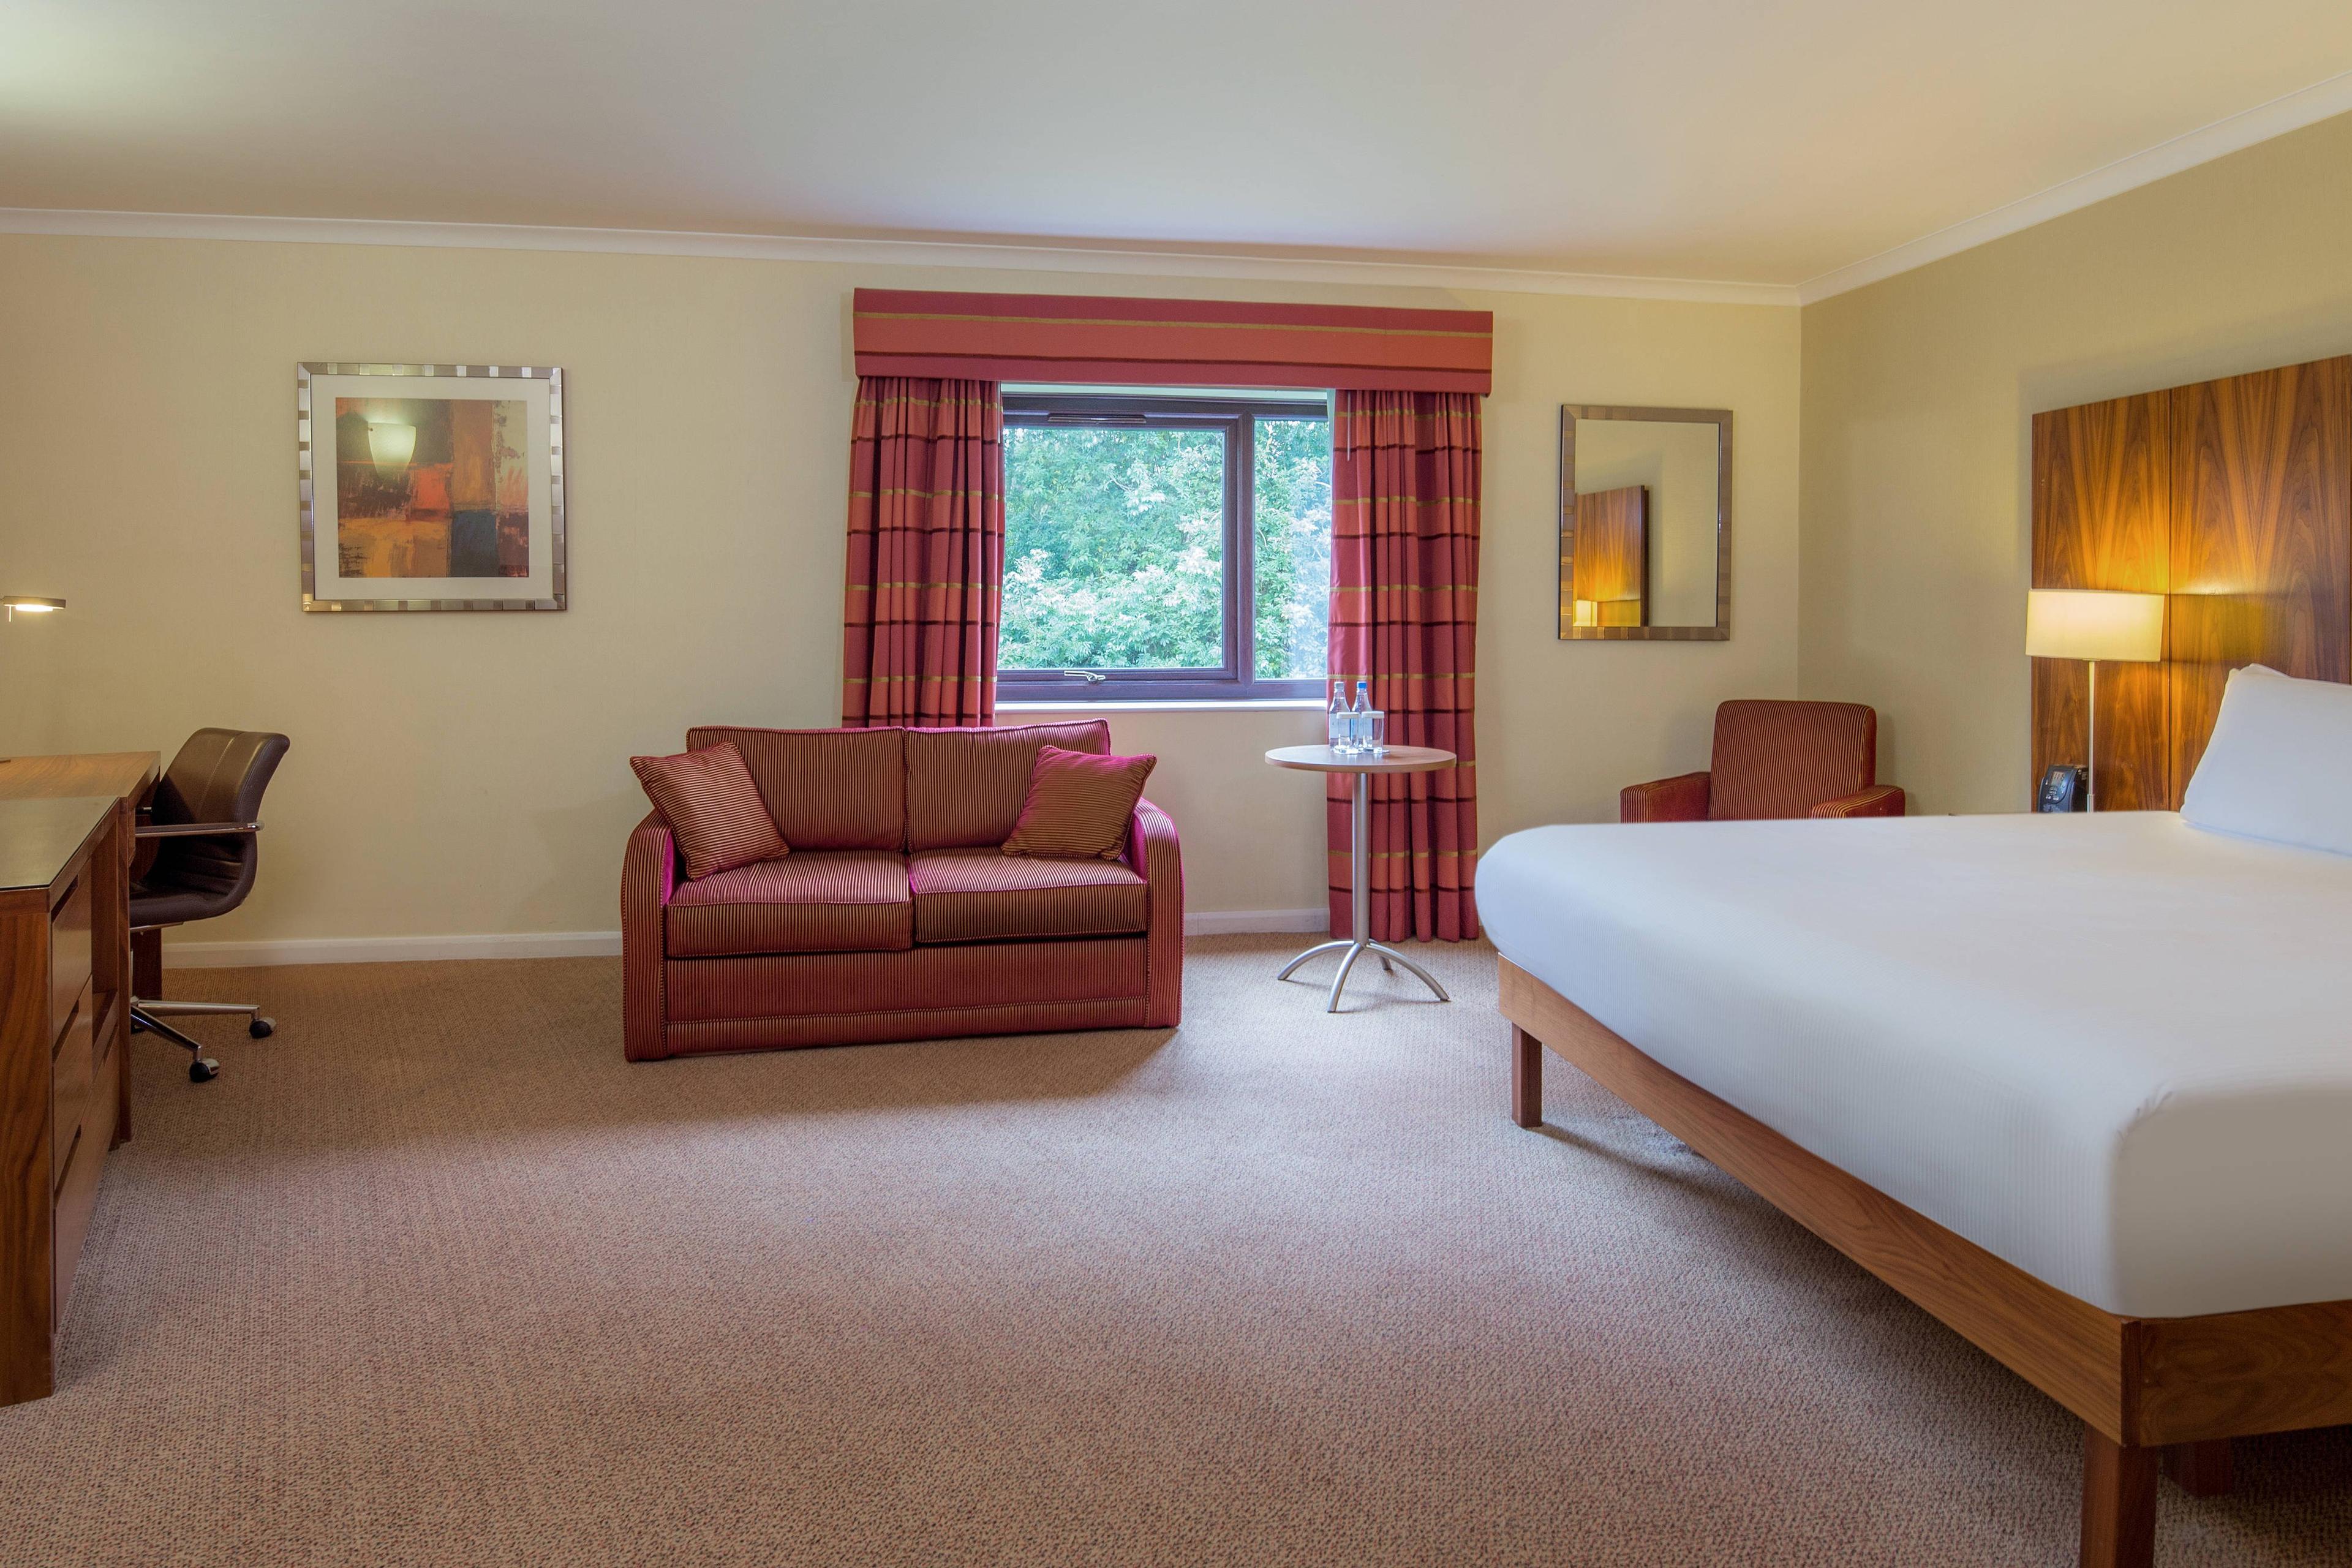 These are our largest rooms, offering comfort to you with a large queen bed and sofa which converts to a sofa bed if required.